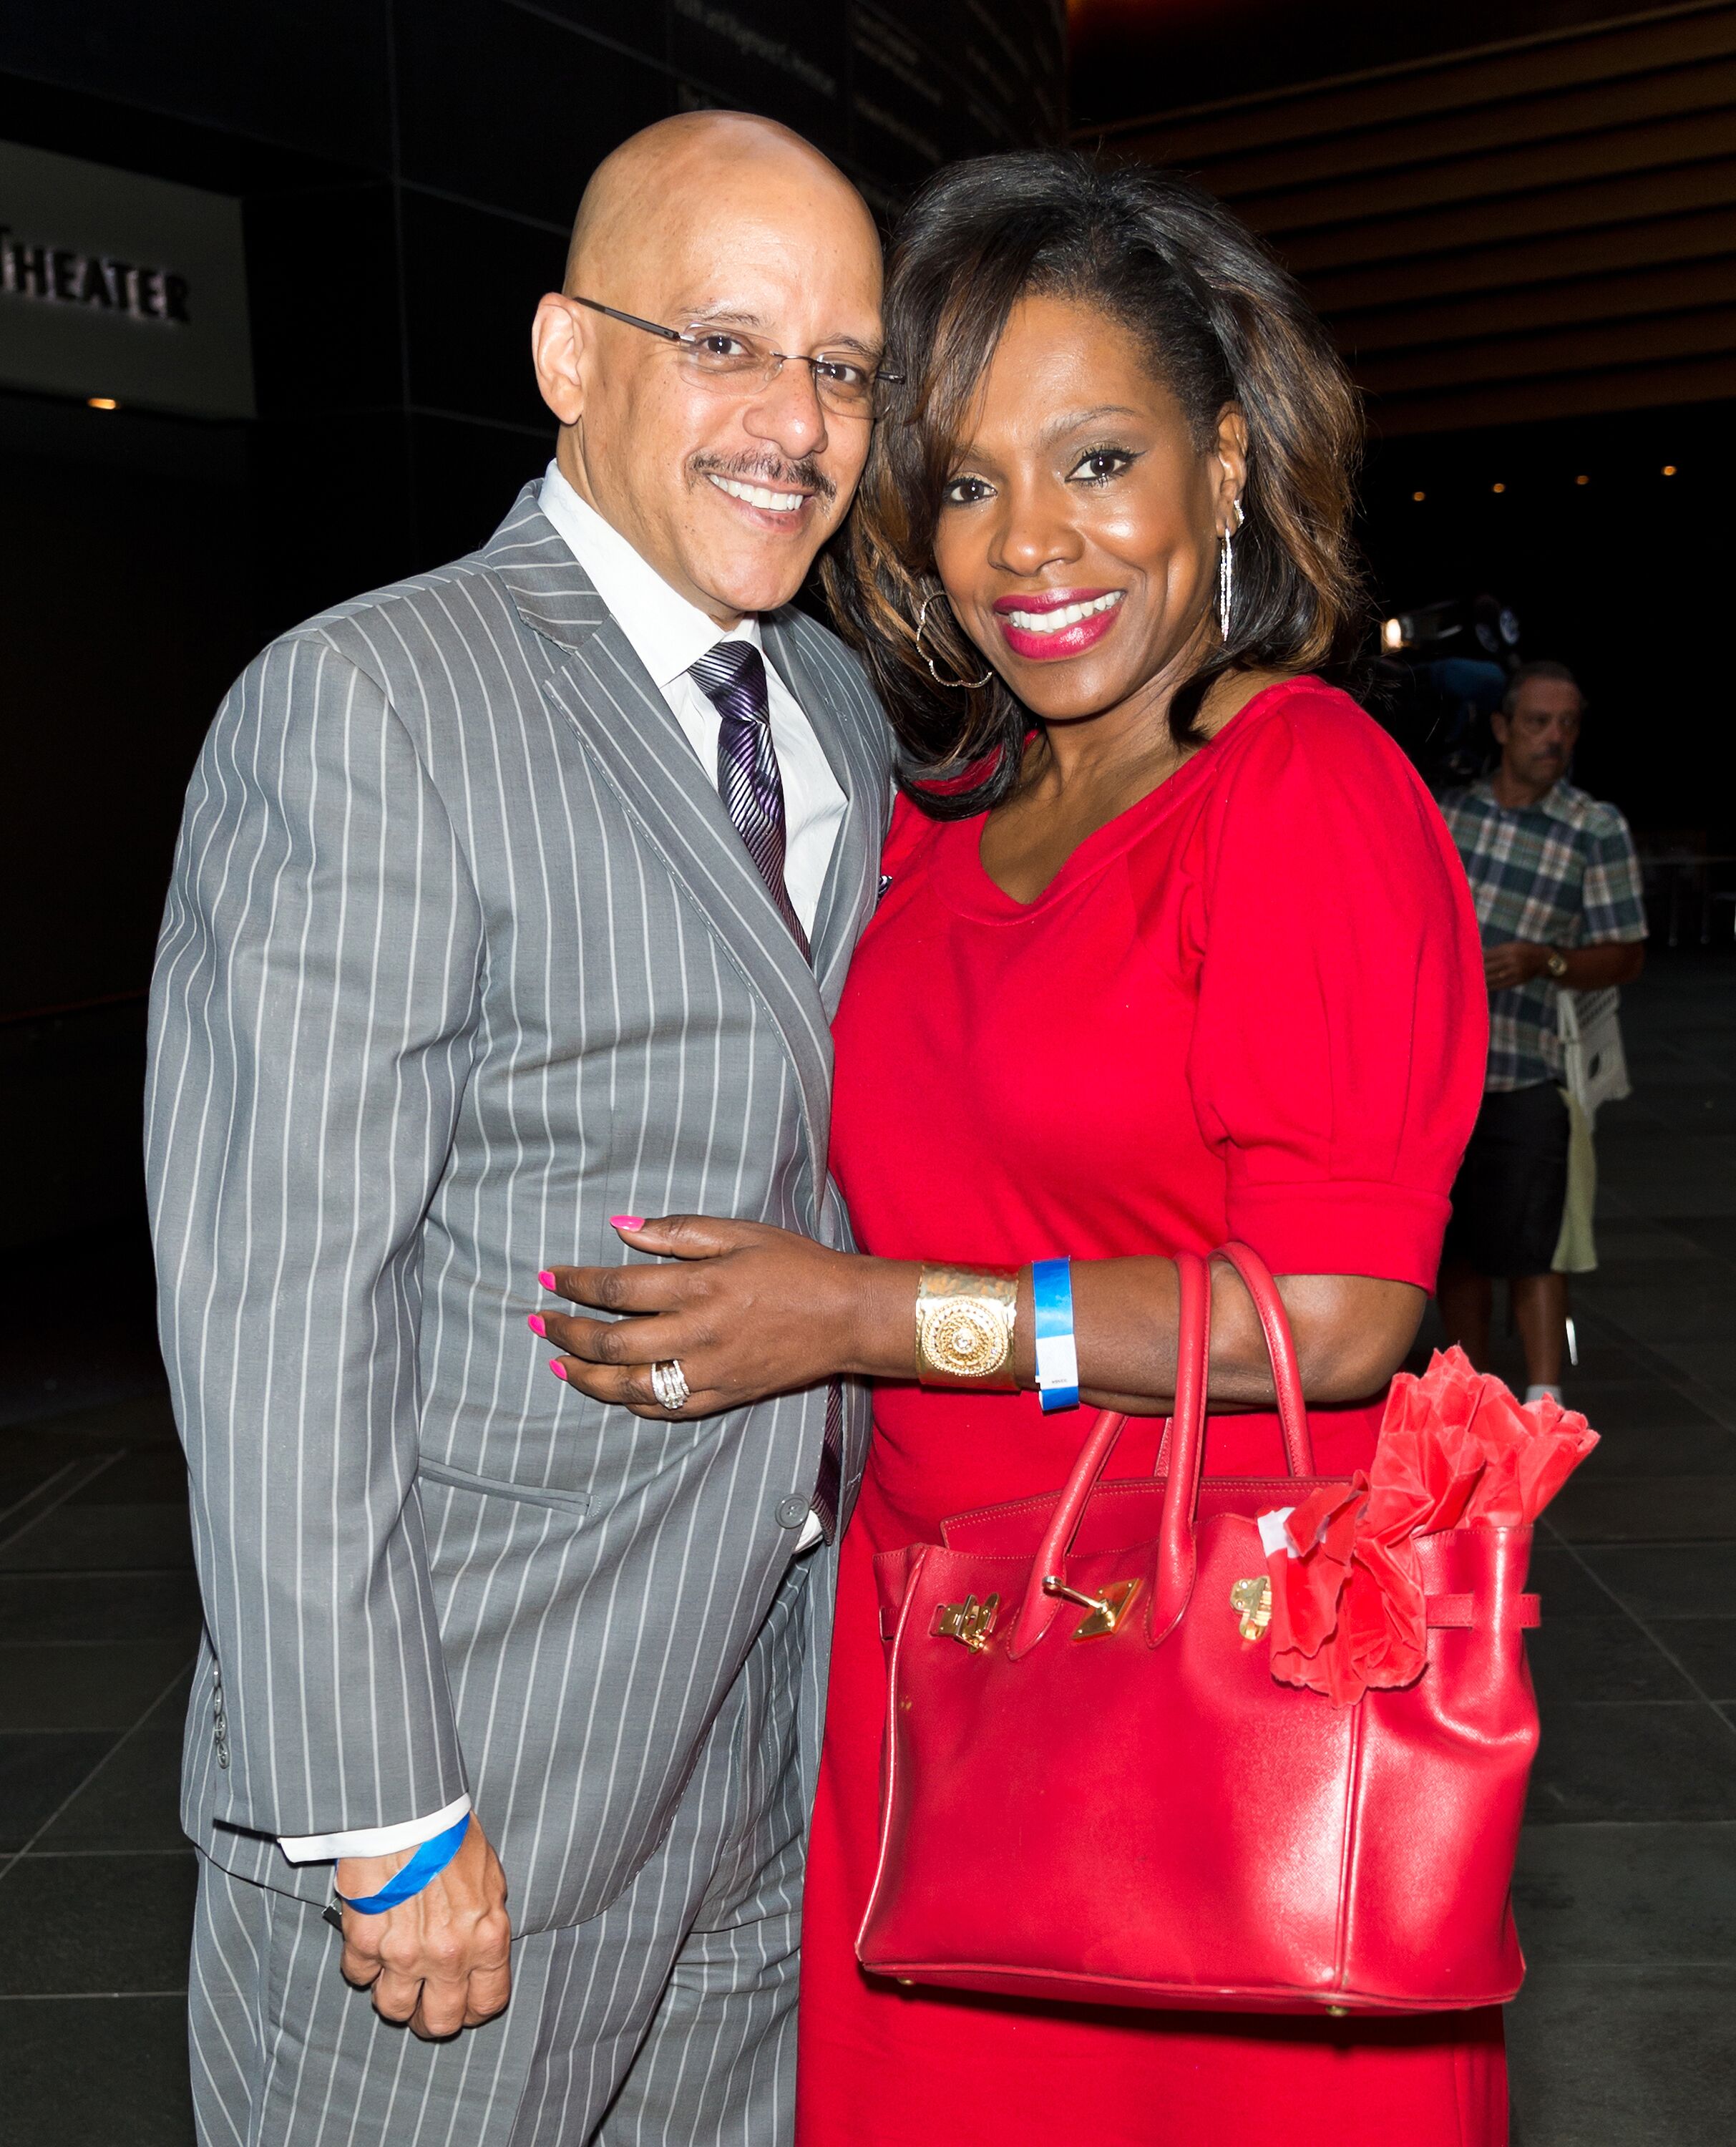 Sheryl Lee Ralph  and Senator Vincent Hughes at a red carpet screening of "The Butler" in 2013/ Source: Getty Images